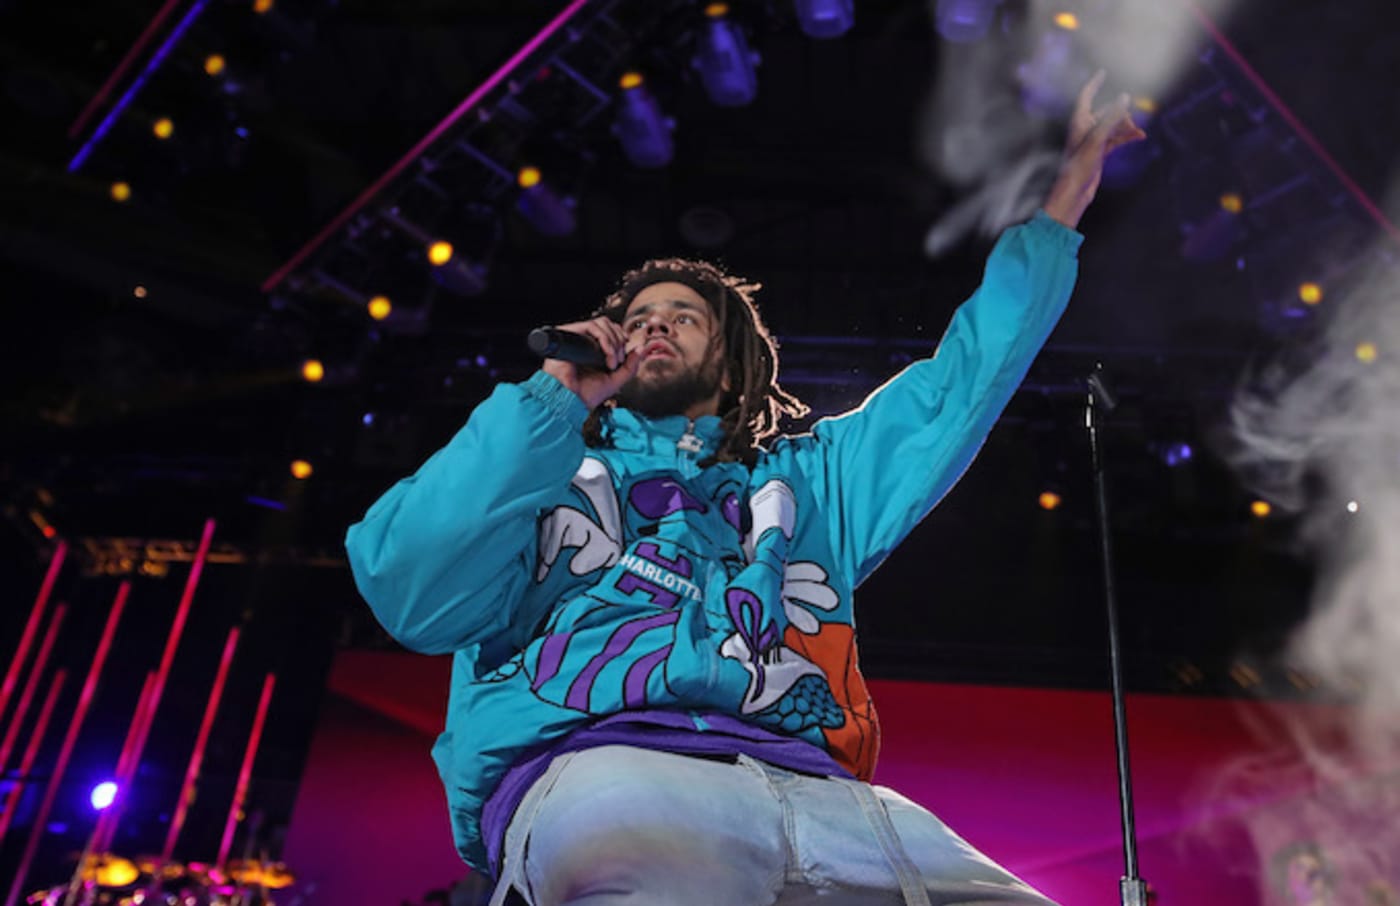 J. Cole performs during the 2019 NBA All Star Game.